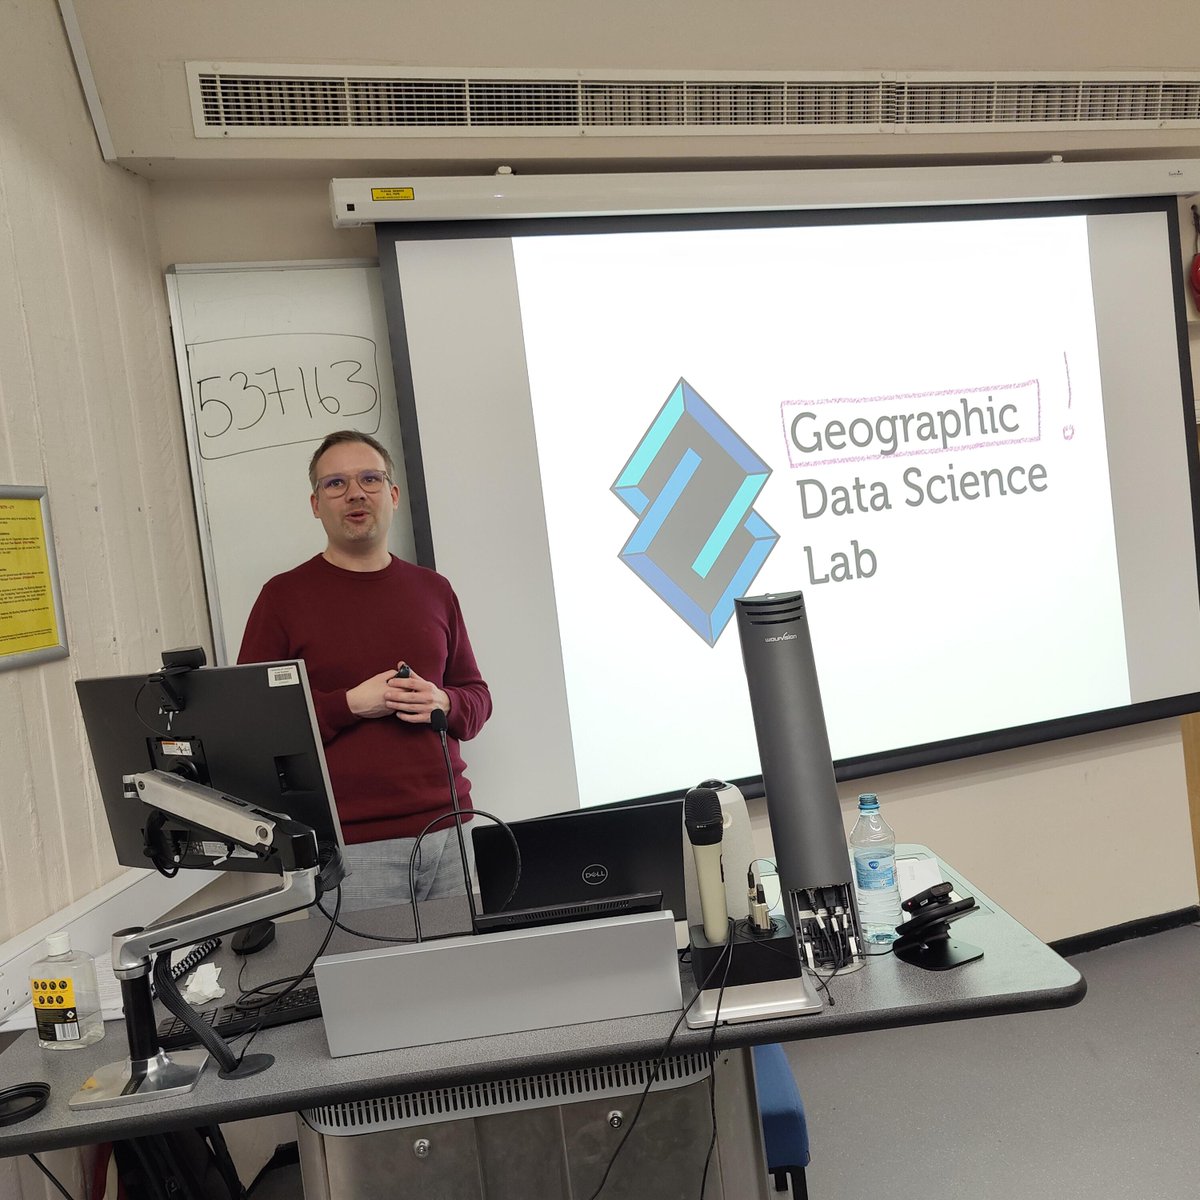 Great presentation from @rwesterh87 at yesterday's GDSL Brown Bag Seminar Really interesting to hear his thoughts on the future of #spatial analysis 🌍🗺️ #geography #datascience